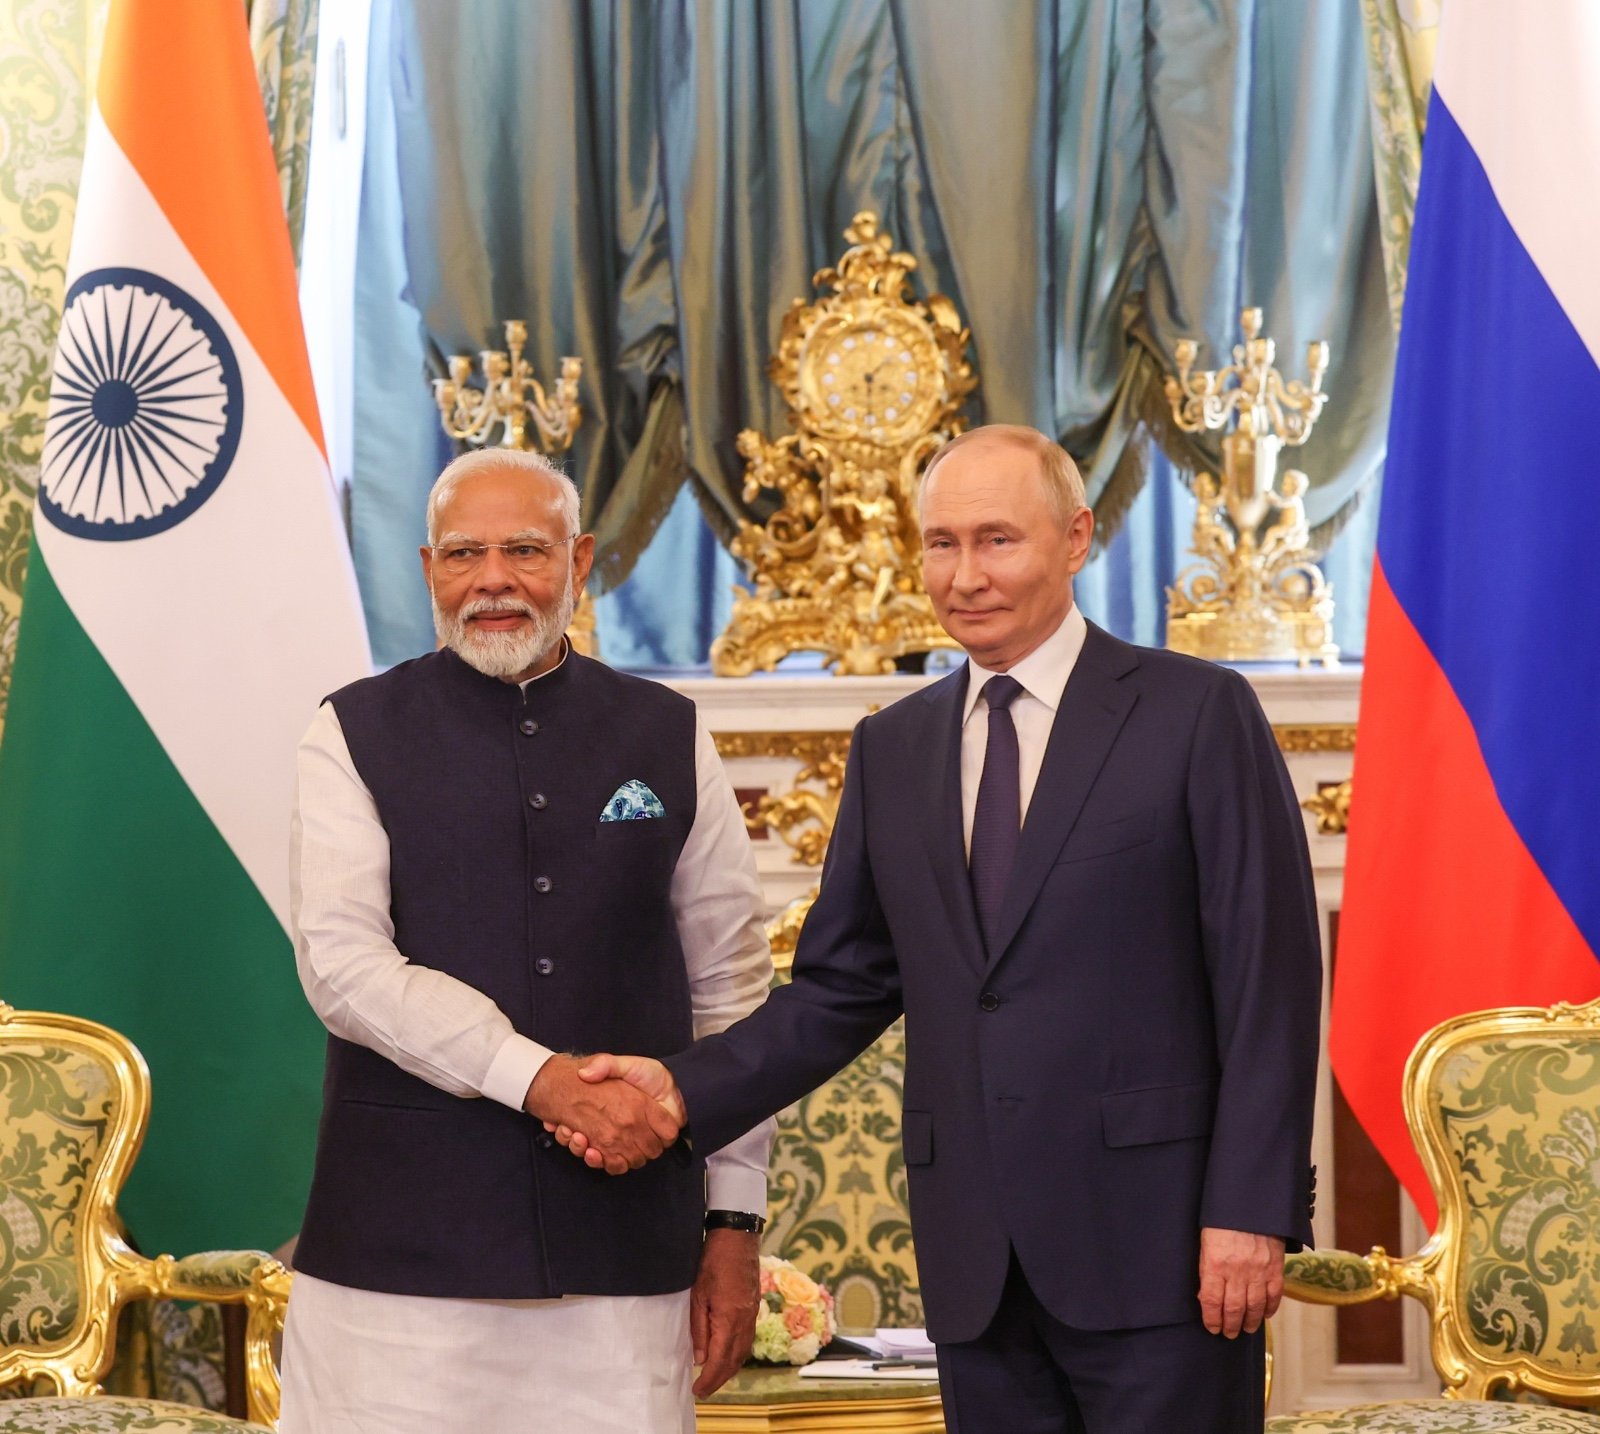 Joint Statement following the 22nd India-Russia Annual Summit